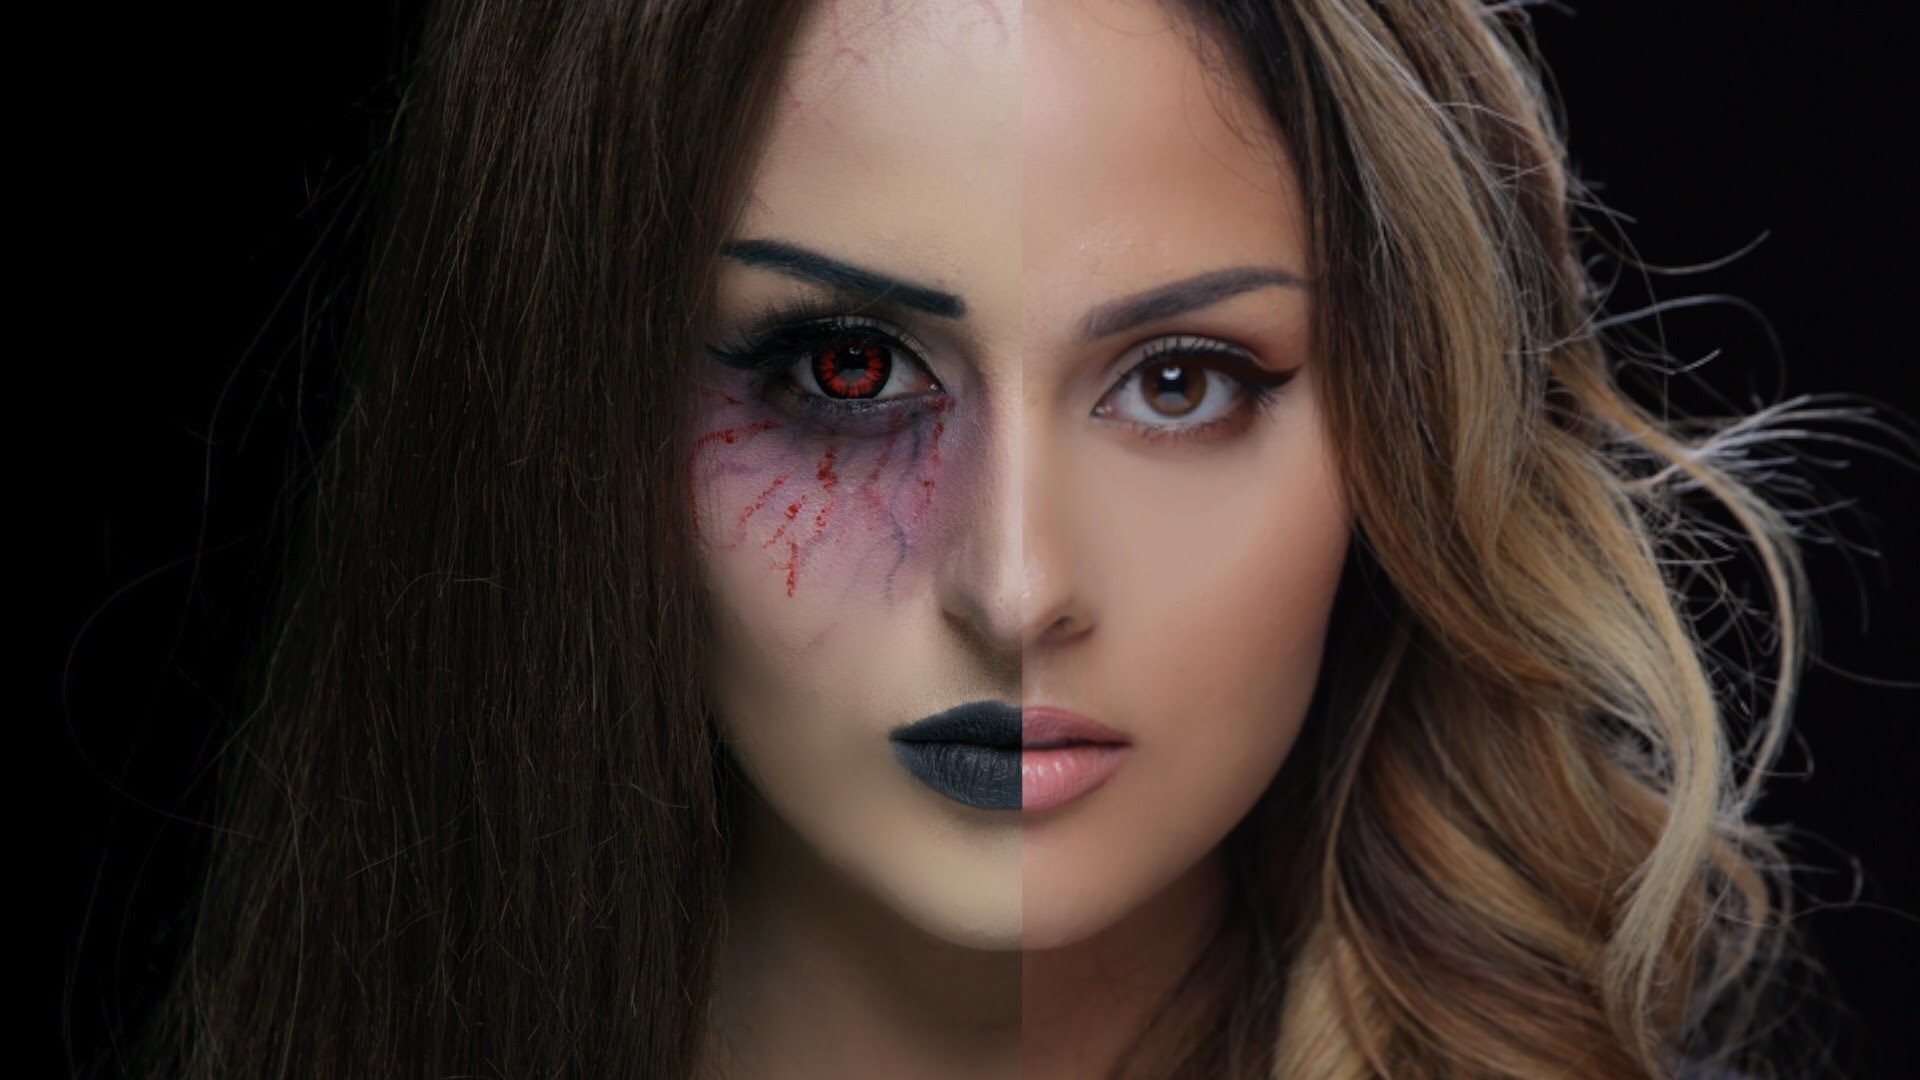 Half Face Halloween Makeup Ideas Everyone Love to Try - A DIY Projects